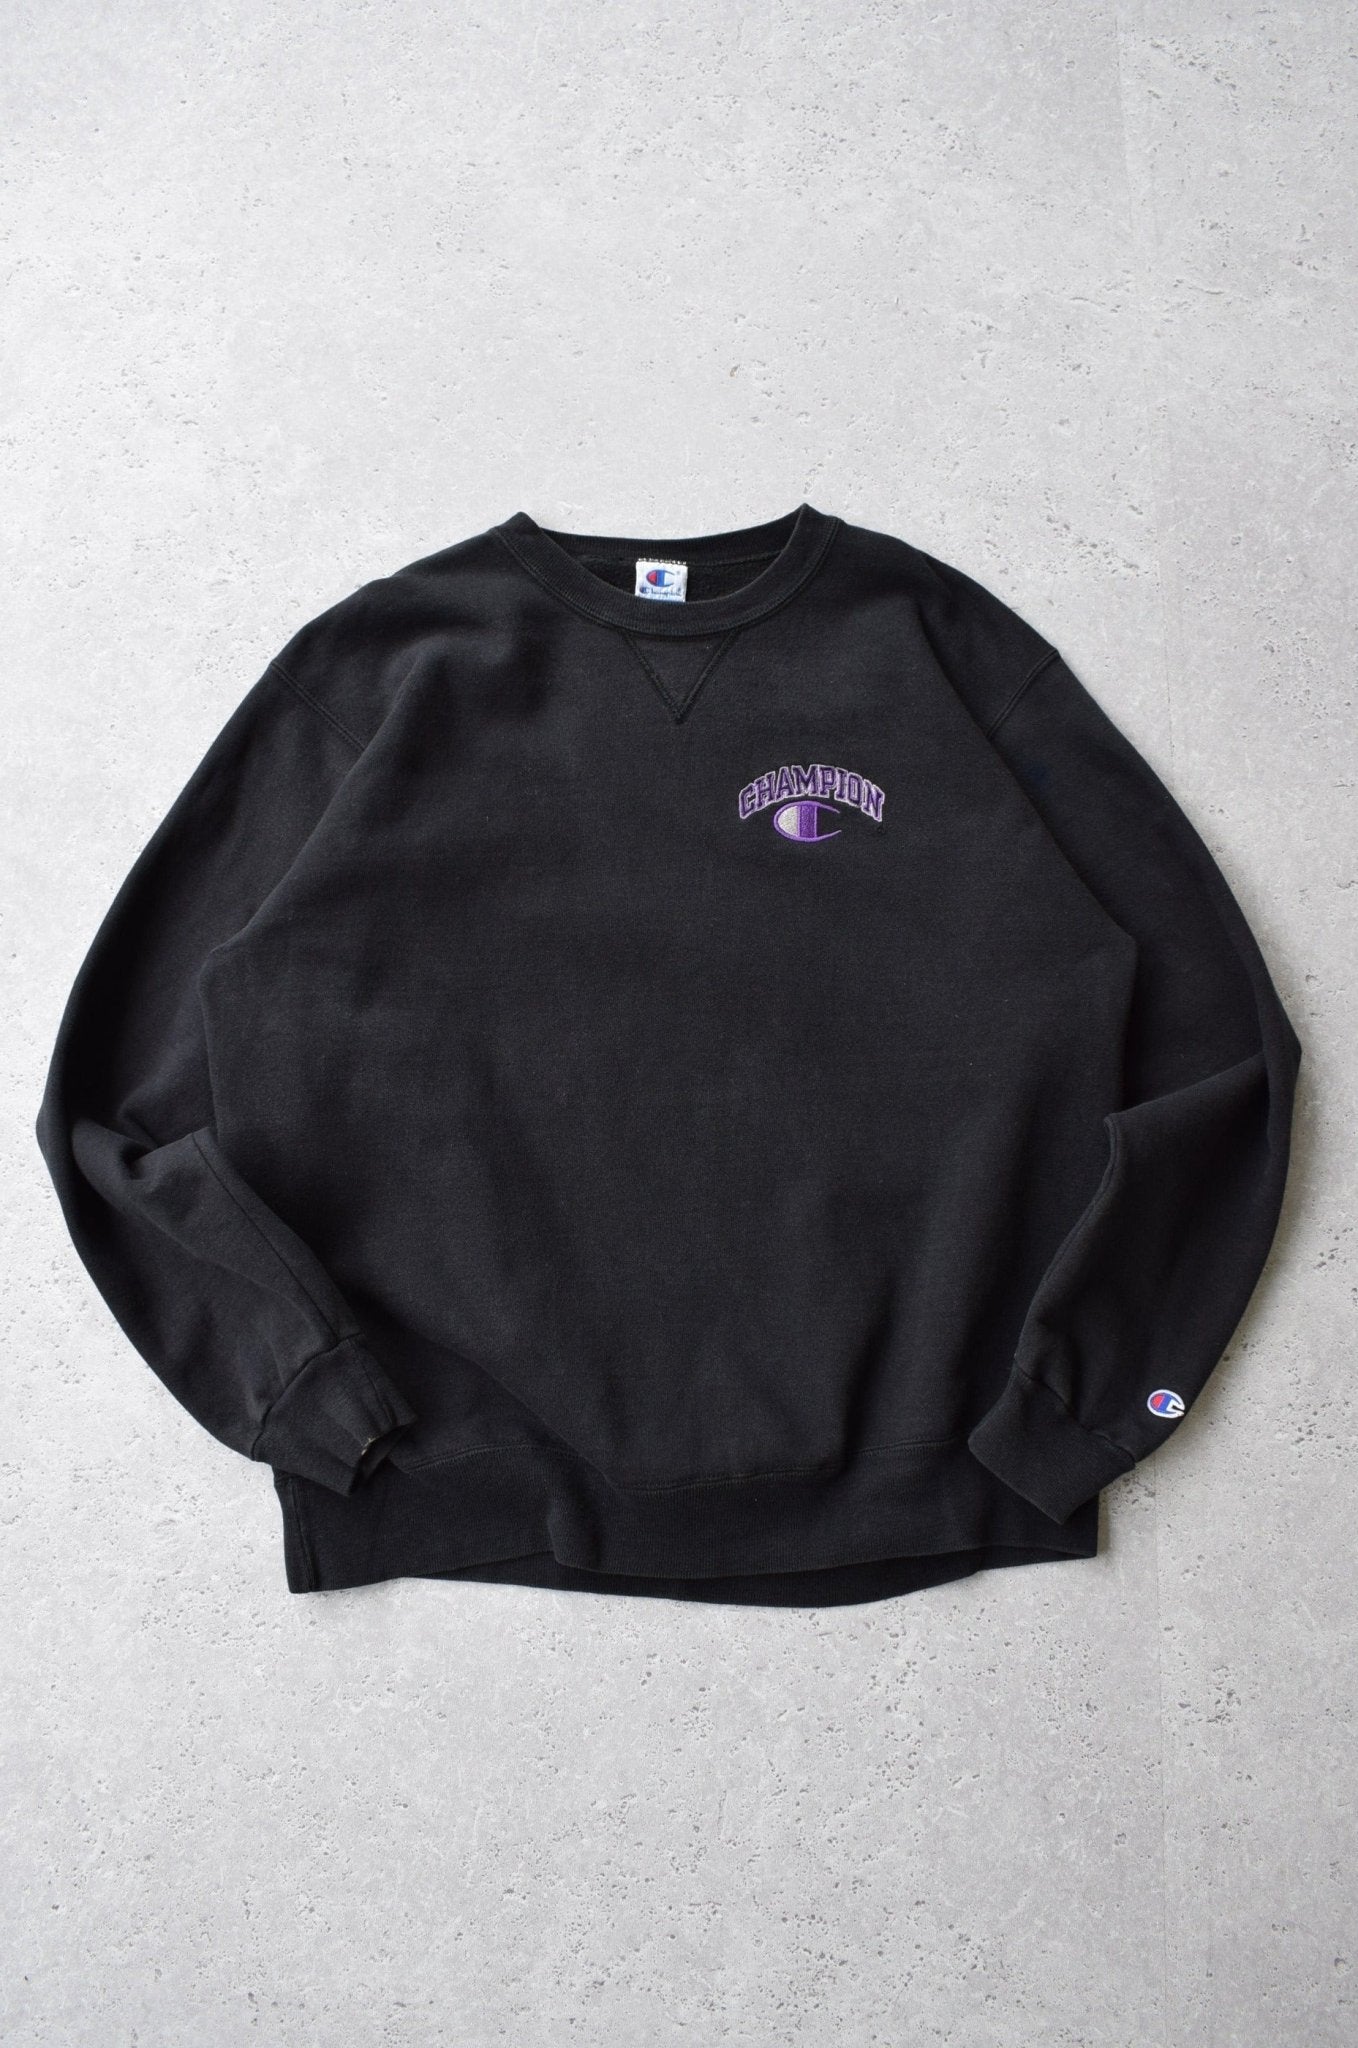 Vintage 90s Champion Embroidered Spellout Sweater (L) - Retrospective Store